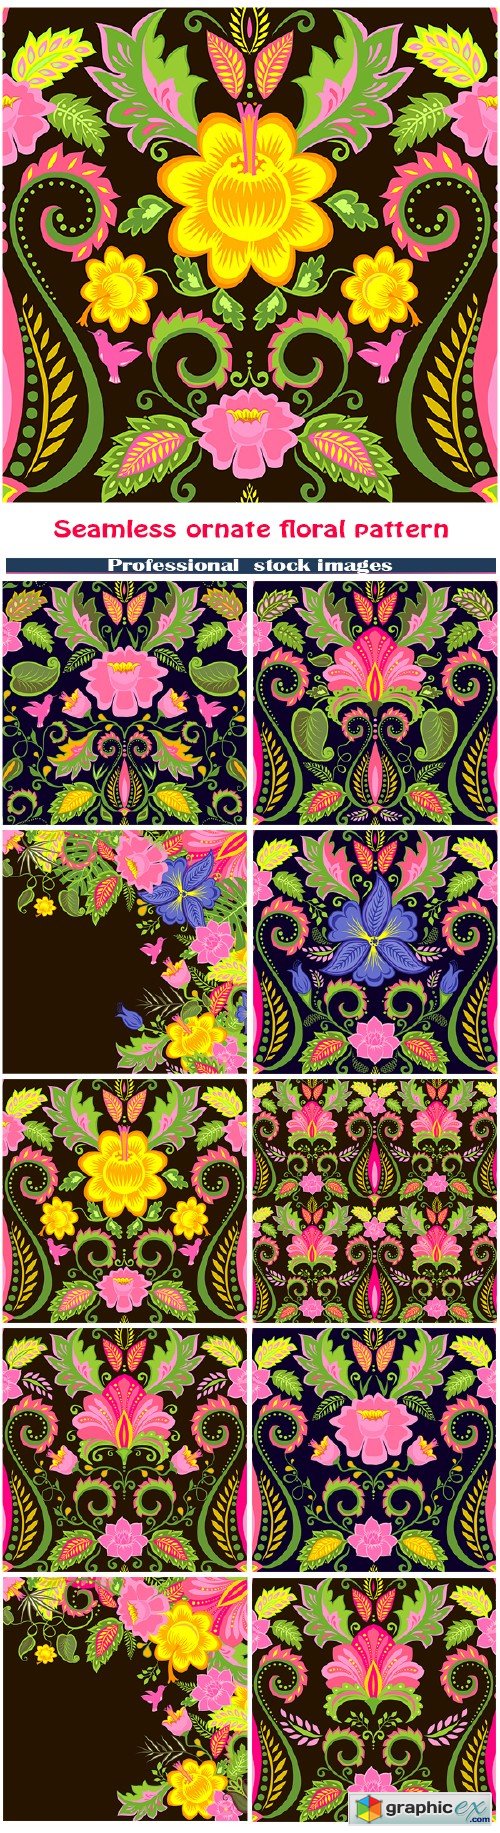 Seamless background with ornate floral pattern